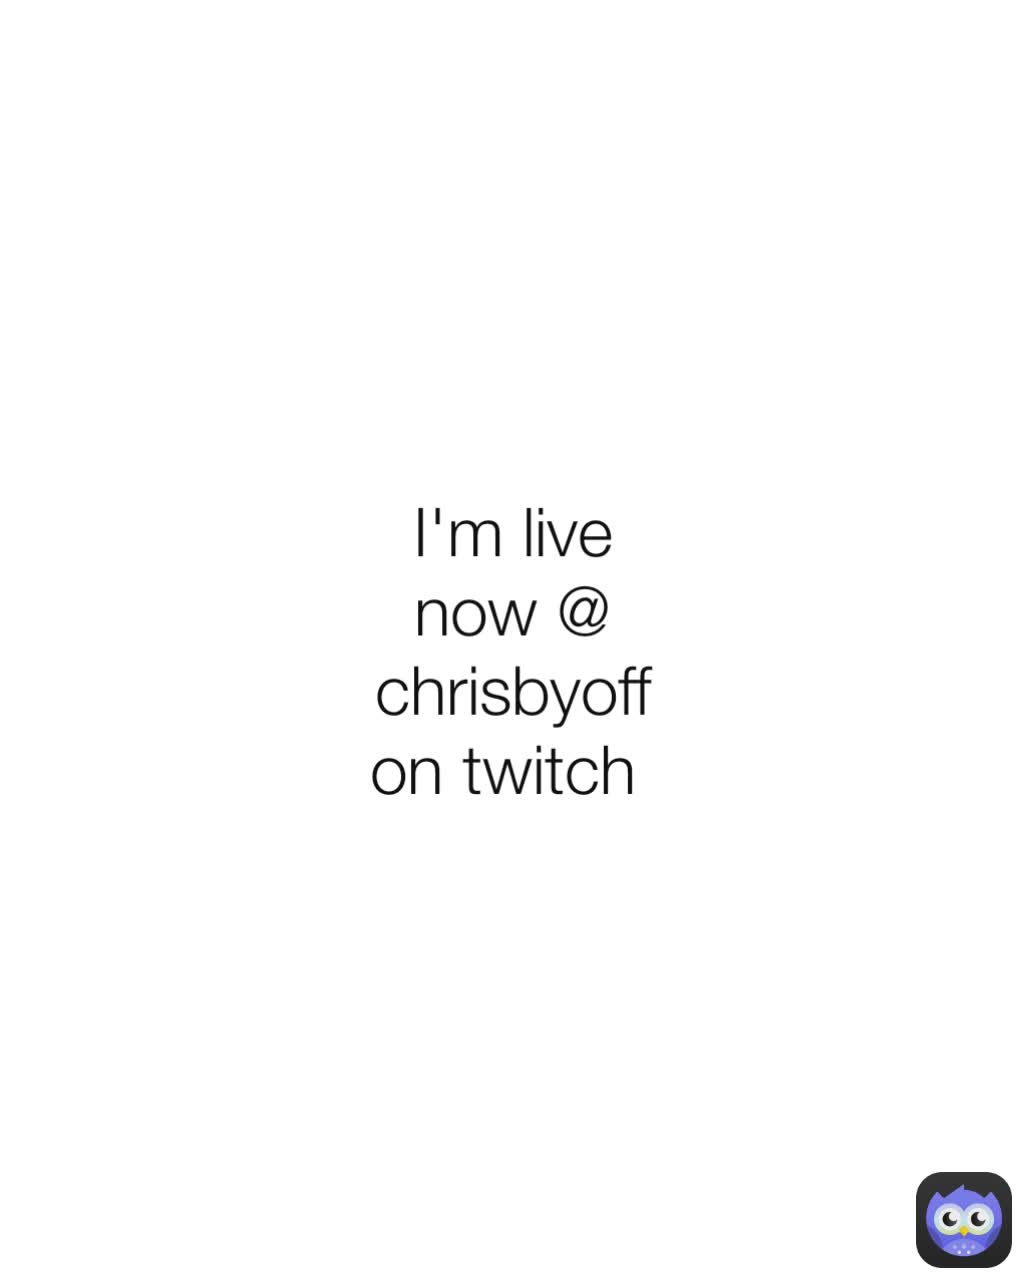 I'm live now @ chrisbyoff on twitch 